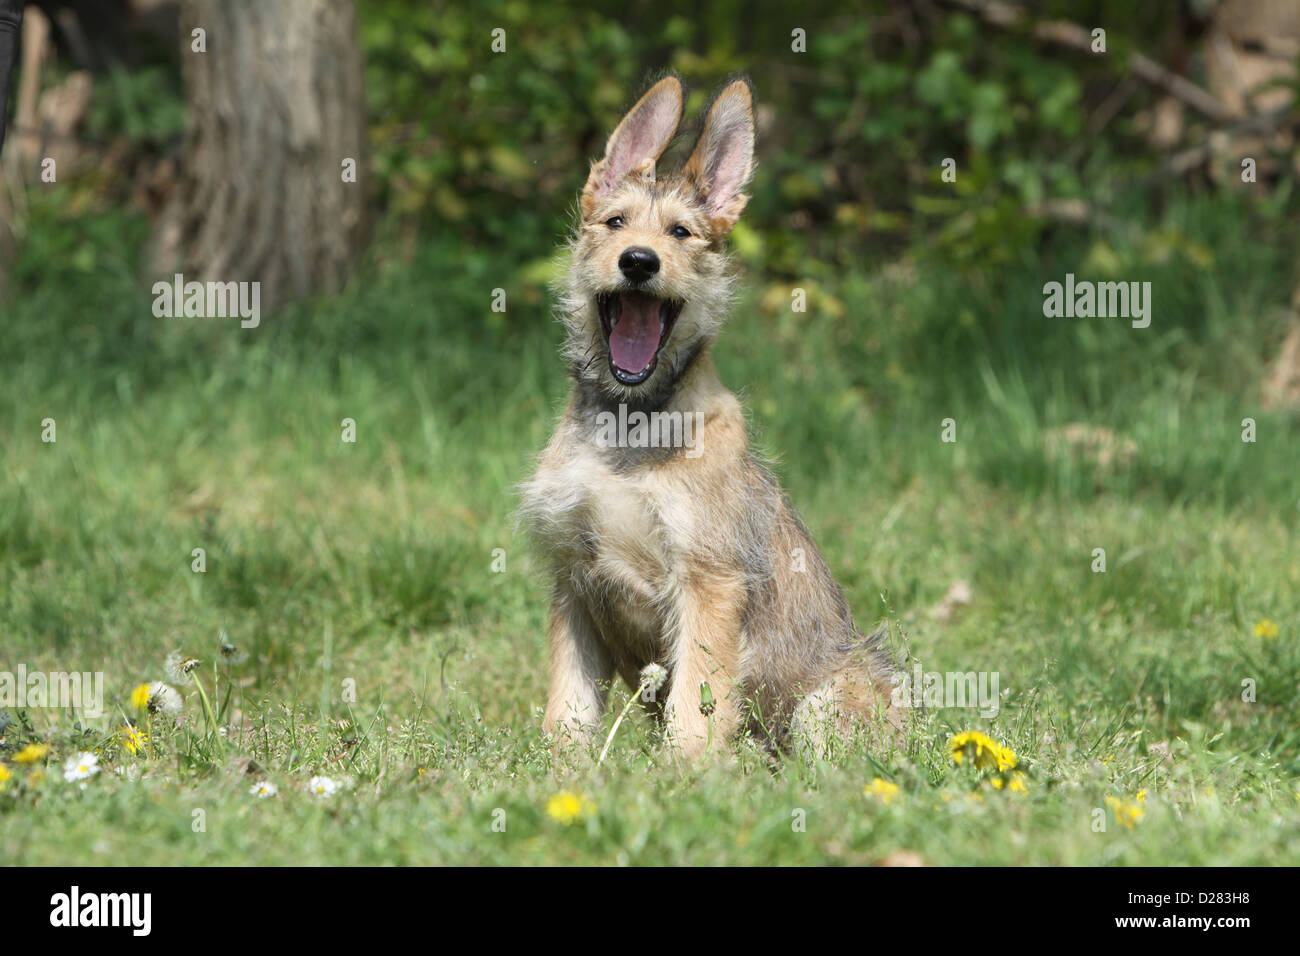 Berger Picard /  Picardy Shepherd dog puppy yawning Stock Photo